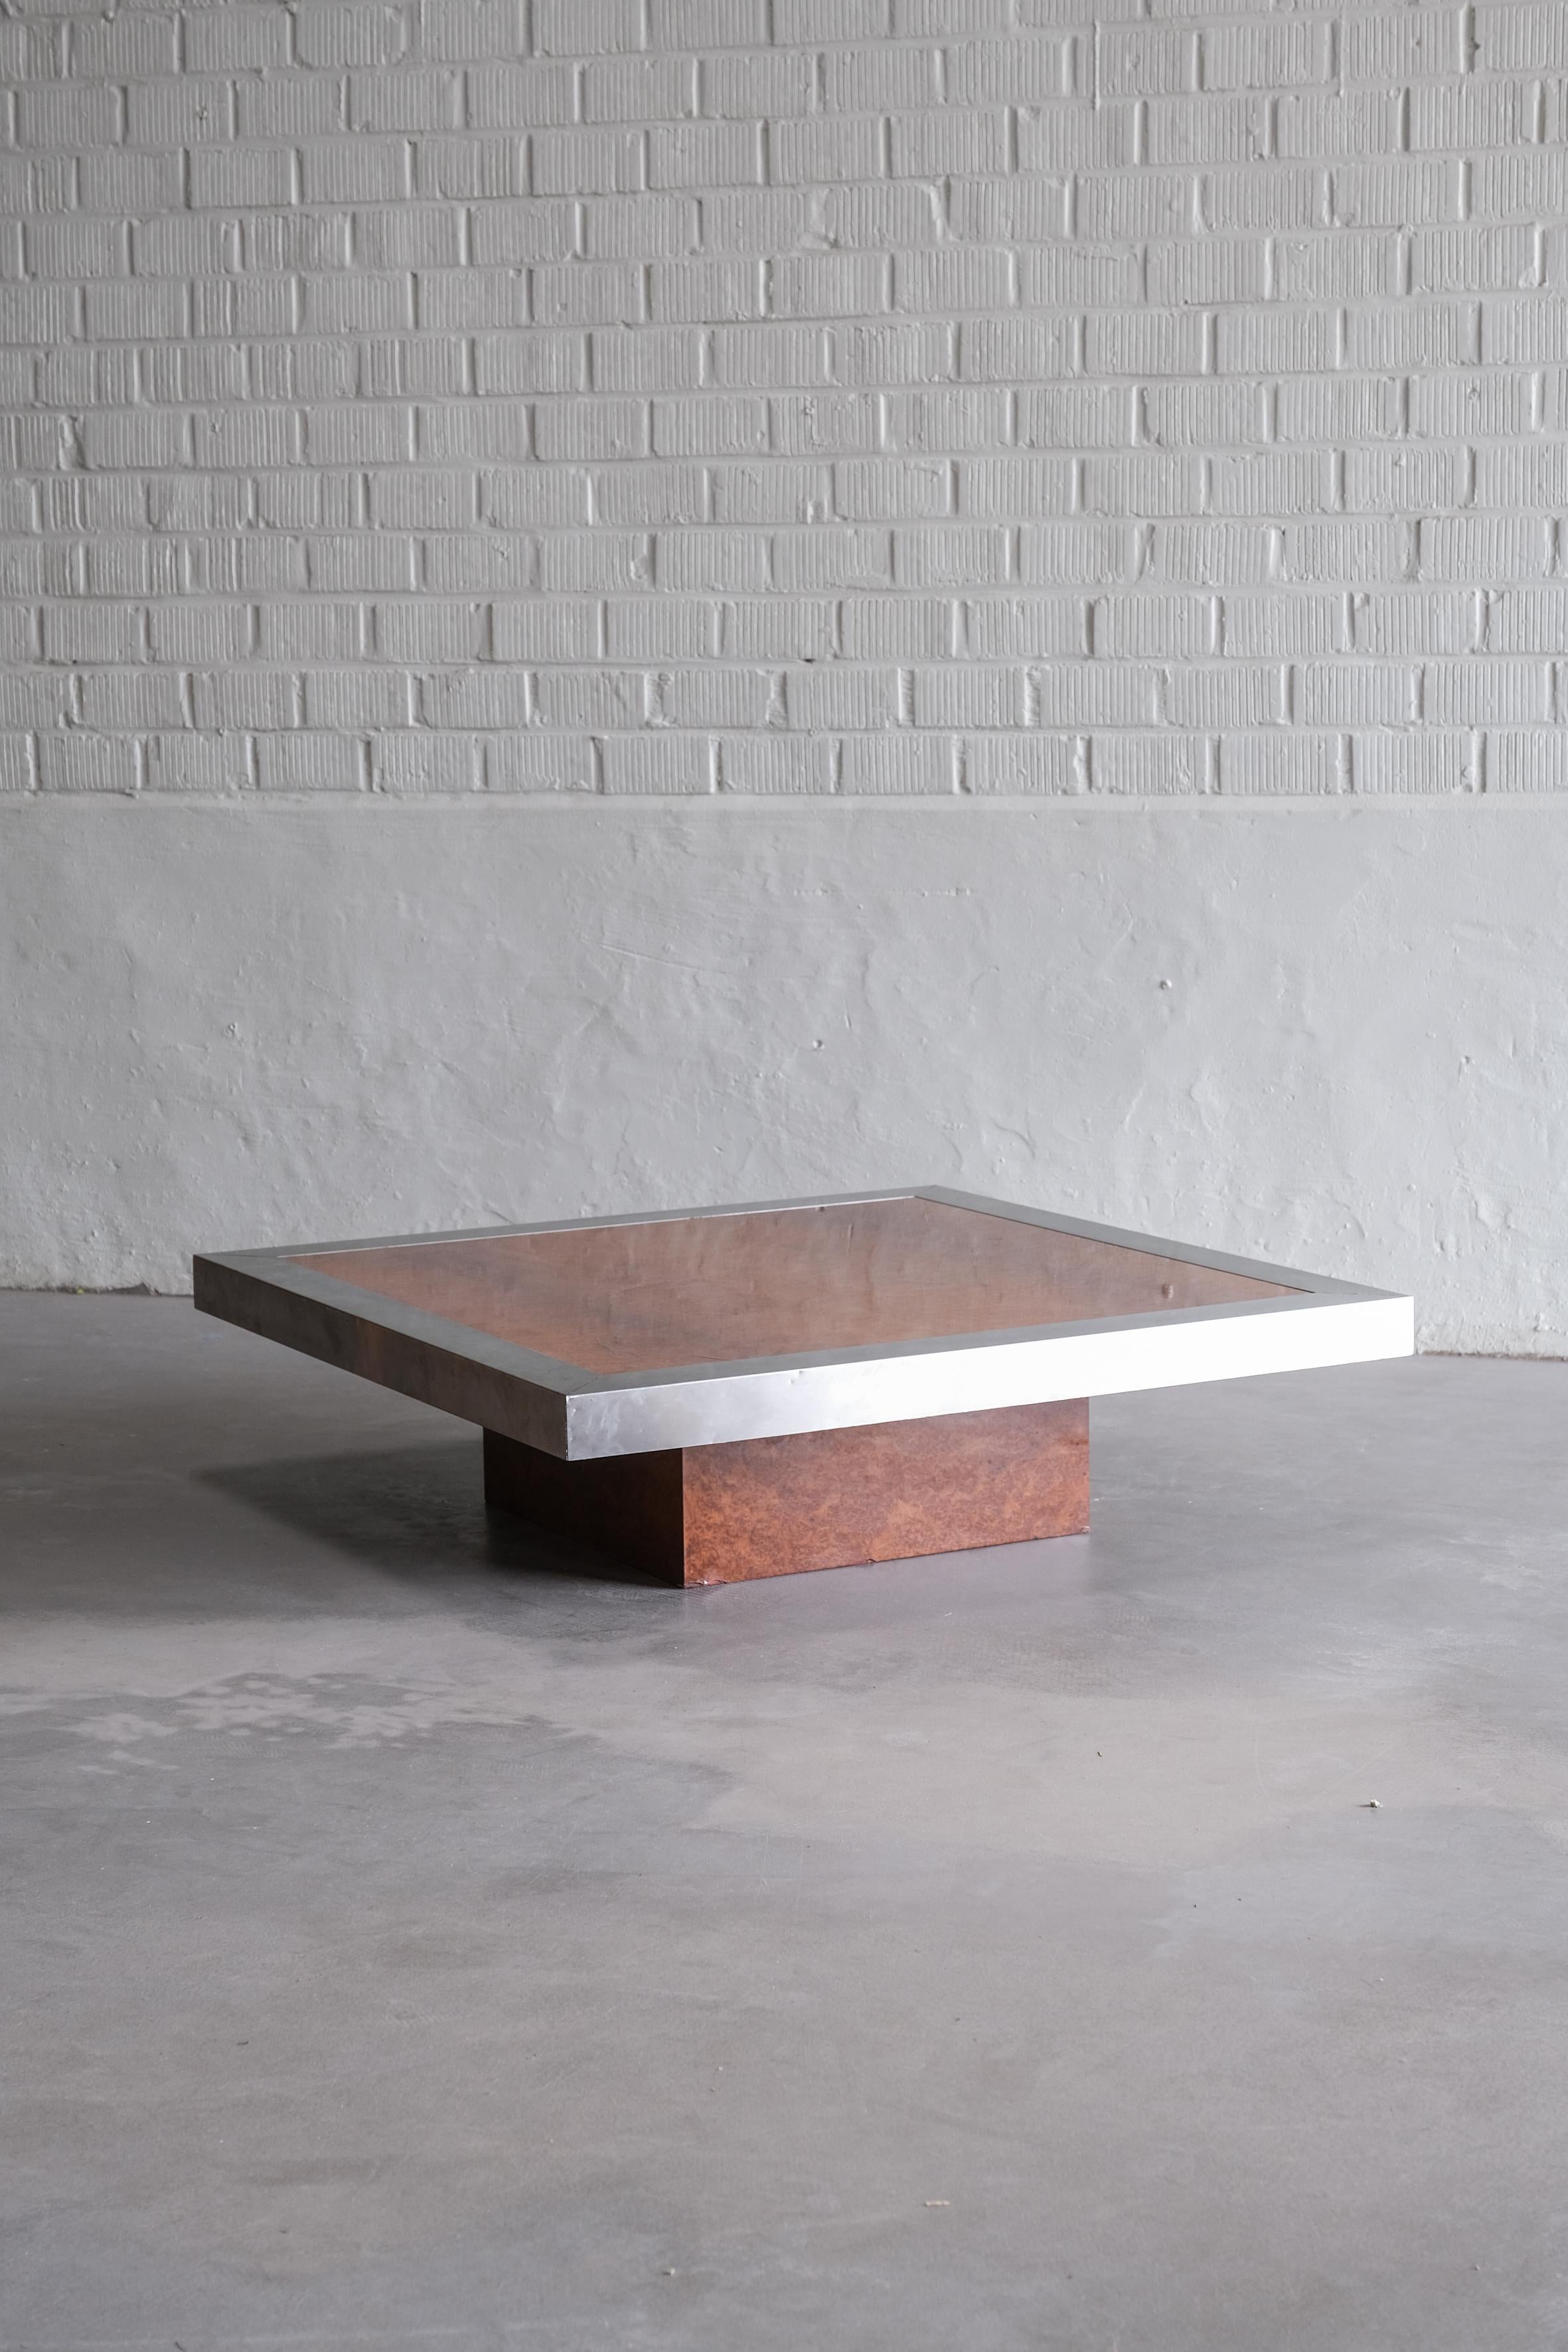 Mid-Century Modern Coffee table in the manner of Willy Rizzo, 20th century Italy